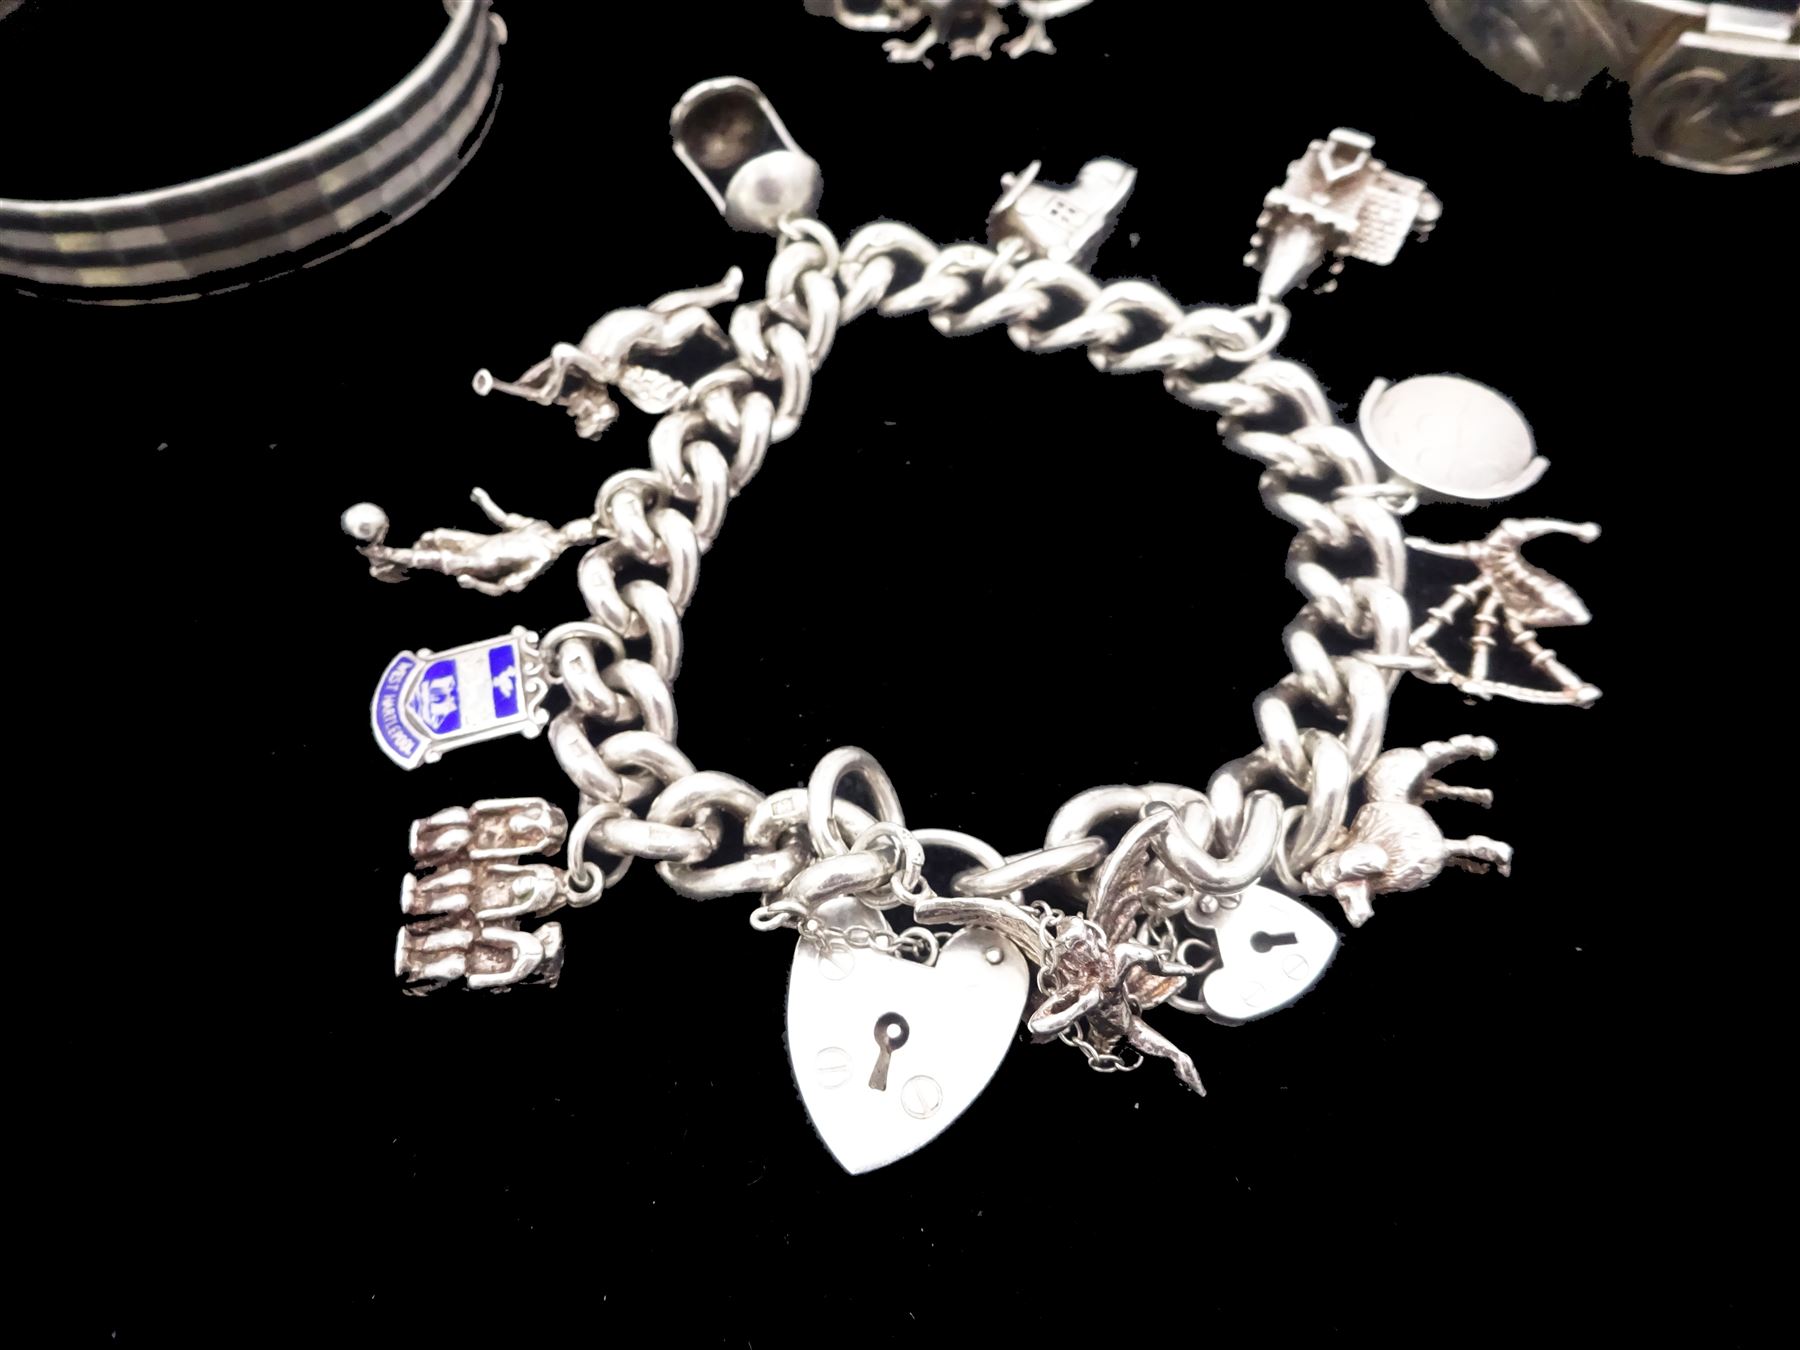 Silver jewellery including curb link bracelet with heart locket clasp and eleven charms including po - Image 2 of 3